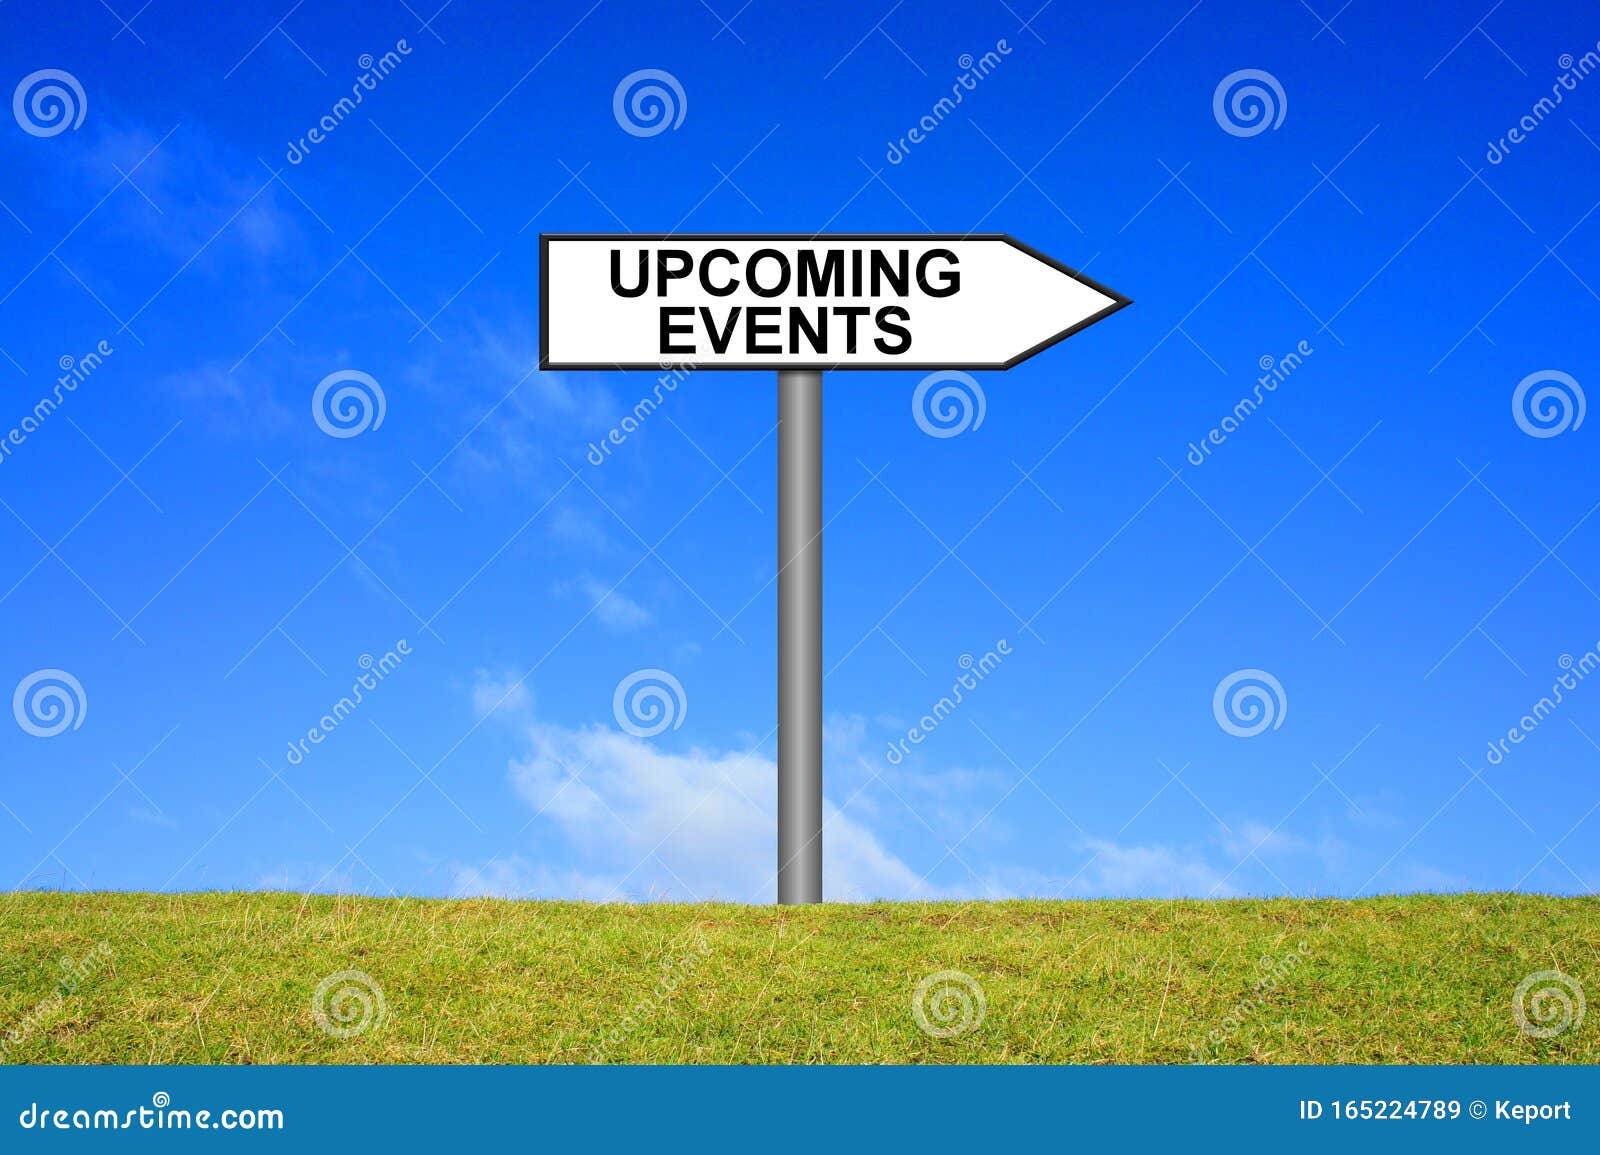 signpost showing upcoming events